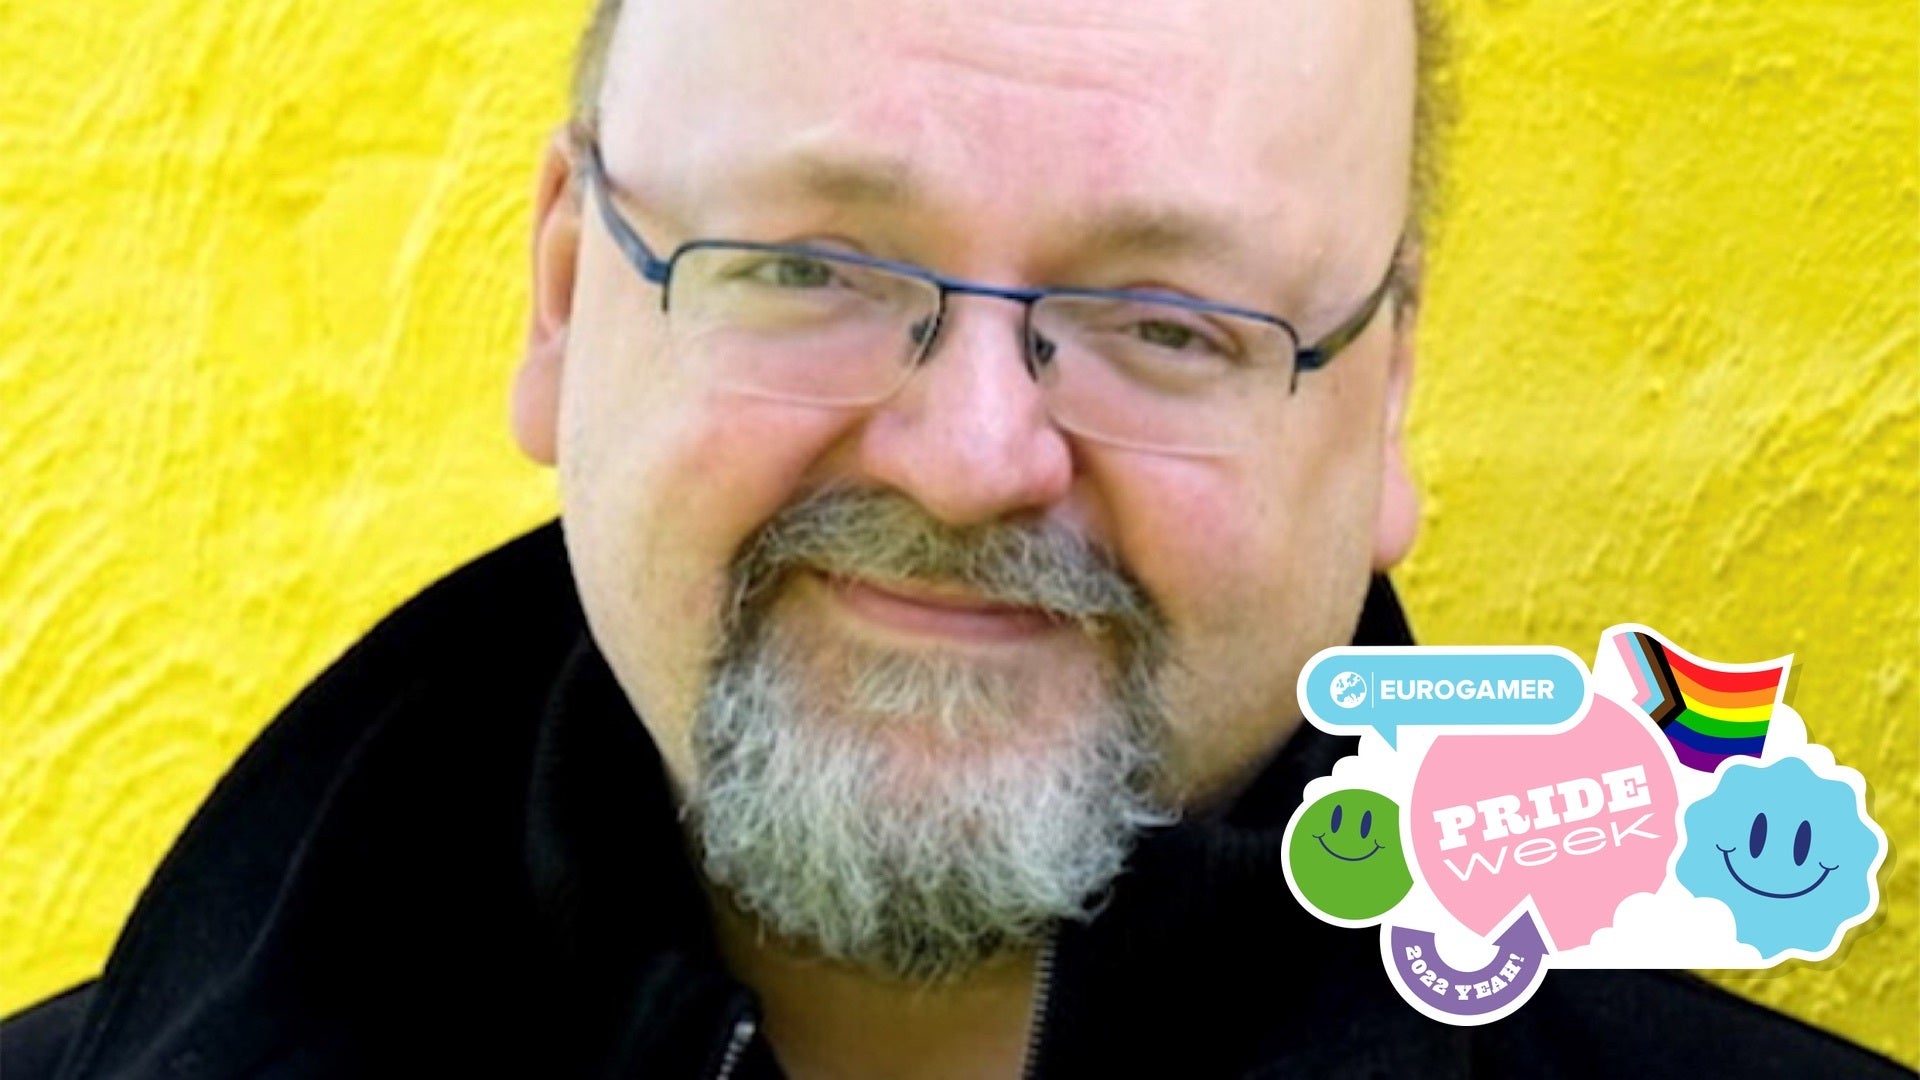 A headshot of former BioWare legend David Gaider, smiling slightly against a glorious, sunshine yellow background. Very nice.